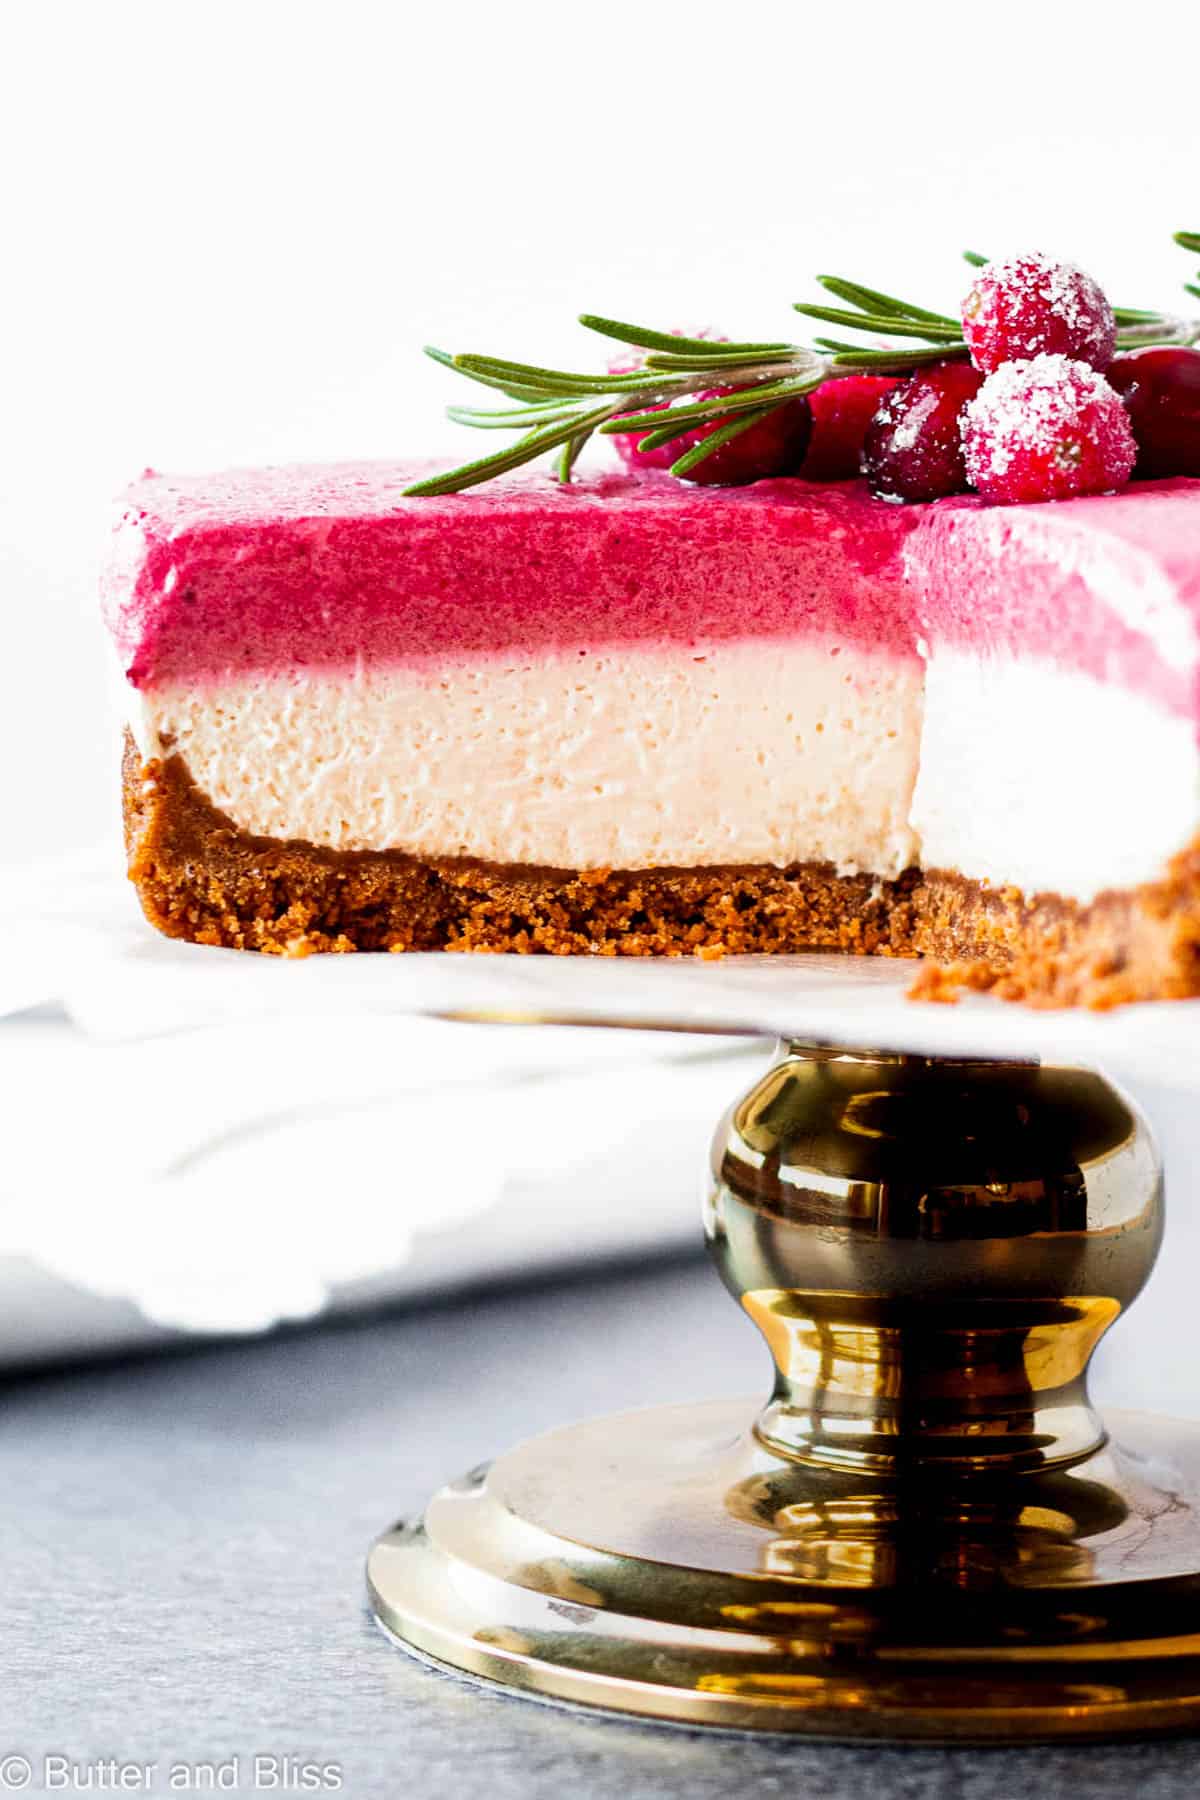 Velvety and creamy interior of a cranberry cheesecake on a cake stand.